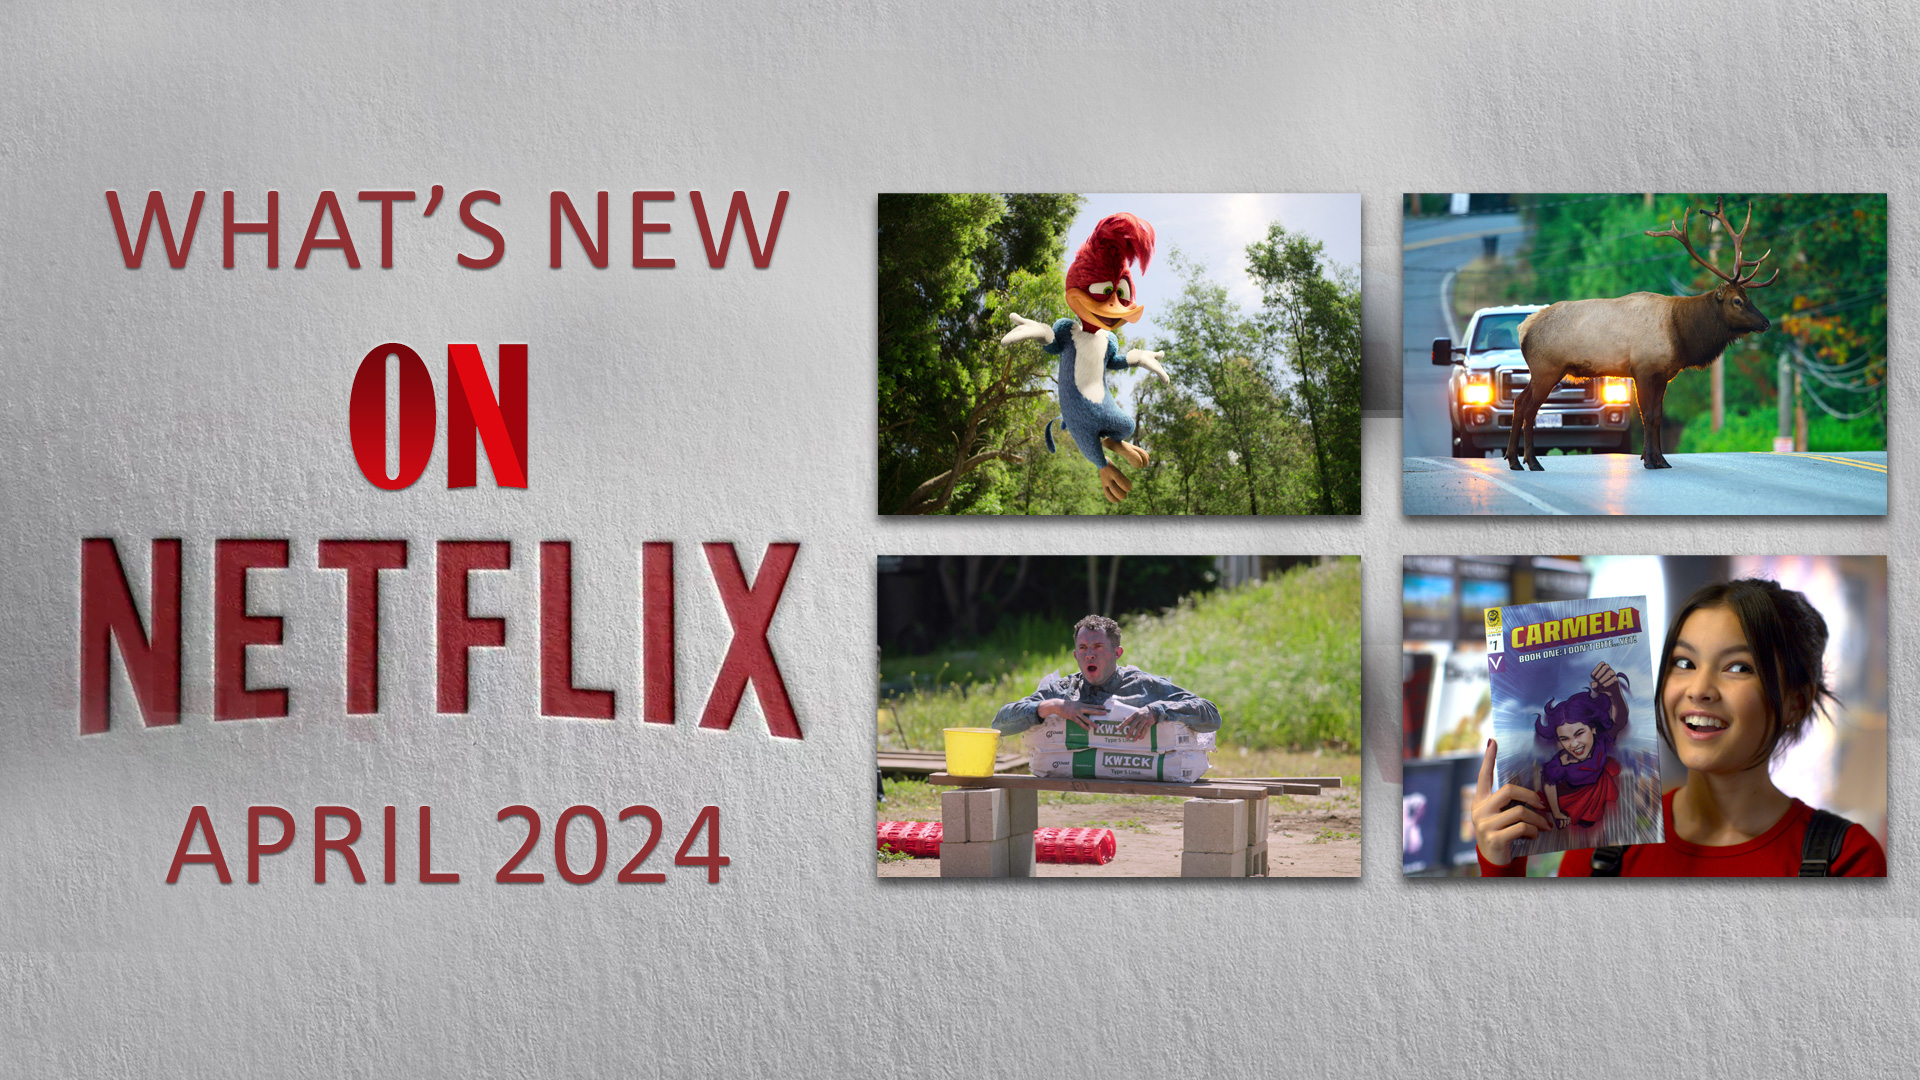 What's New on Netflix April 2024